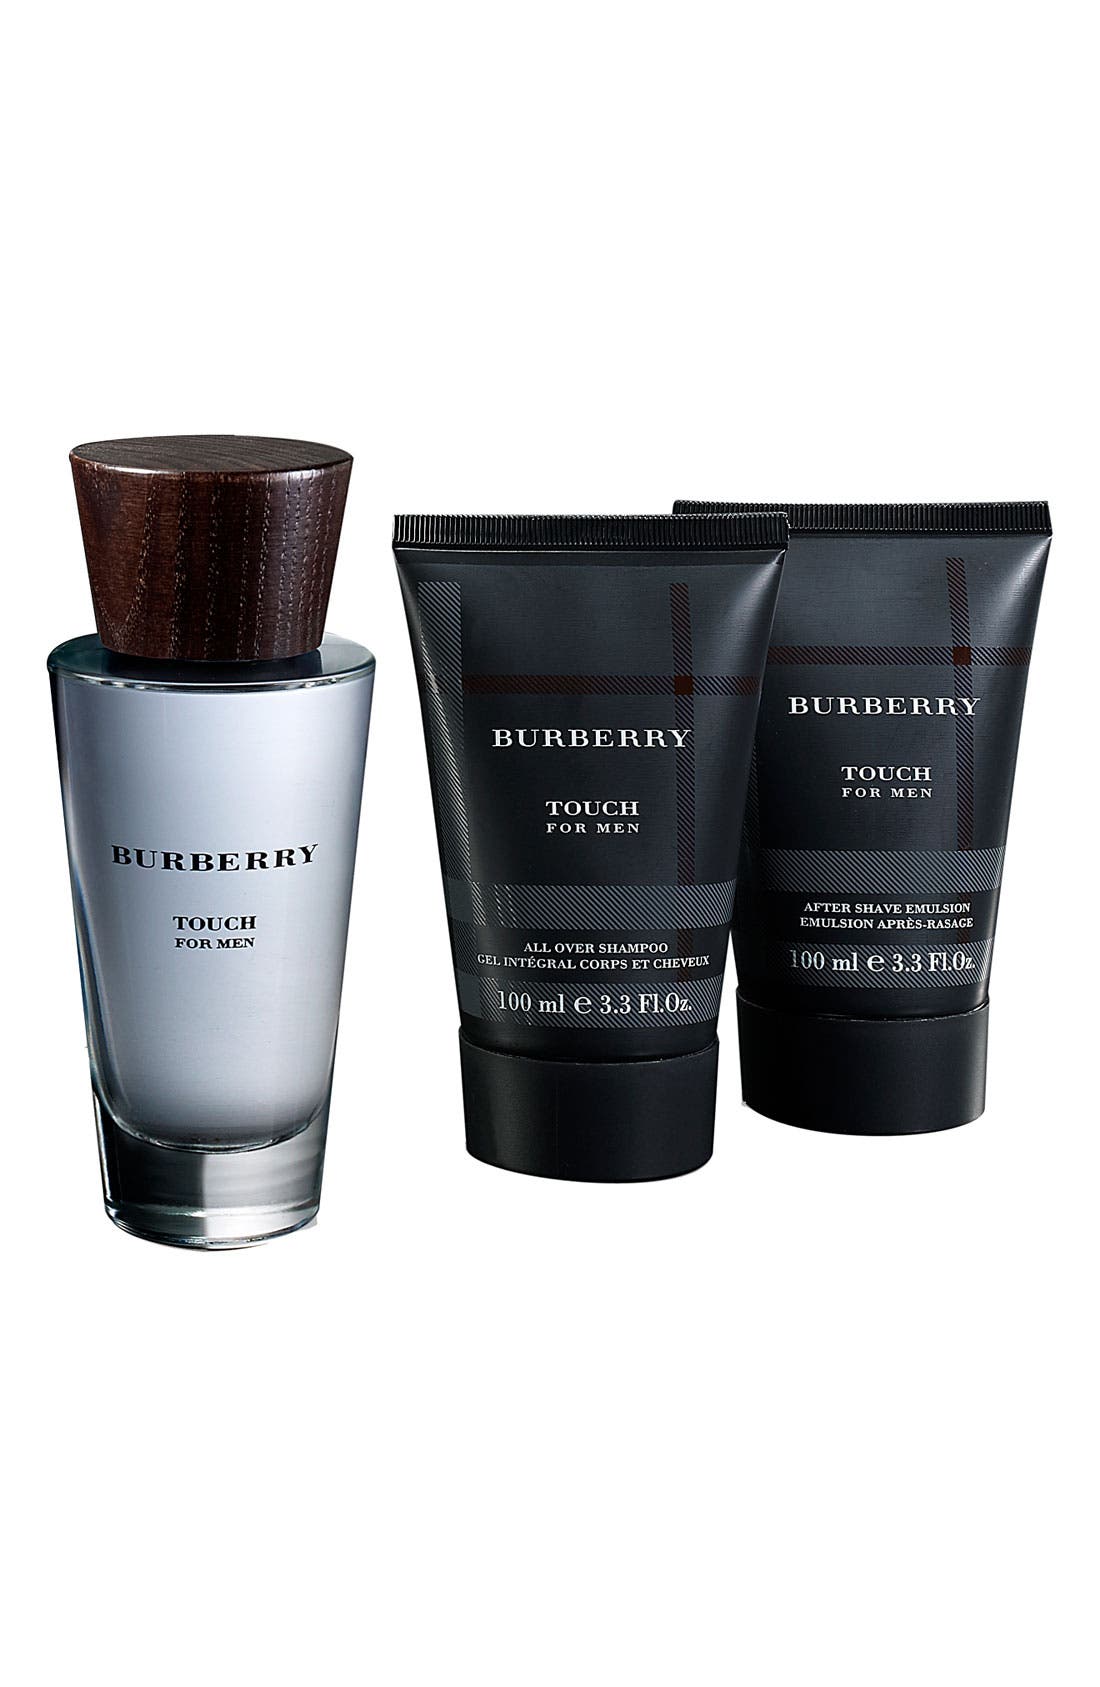 burberry touch for men set